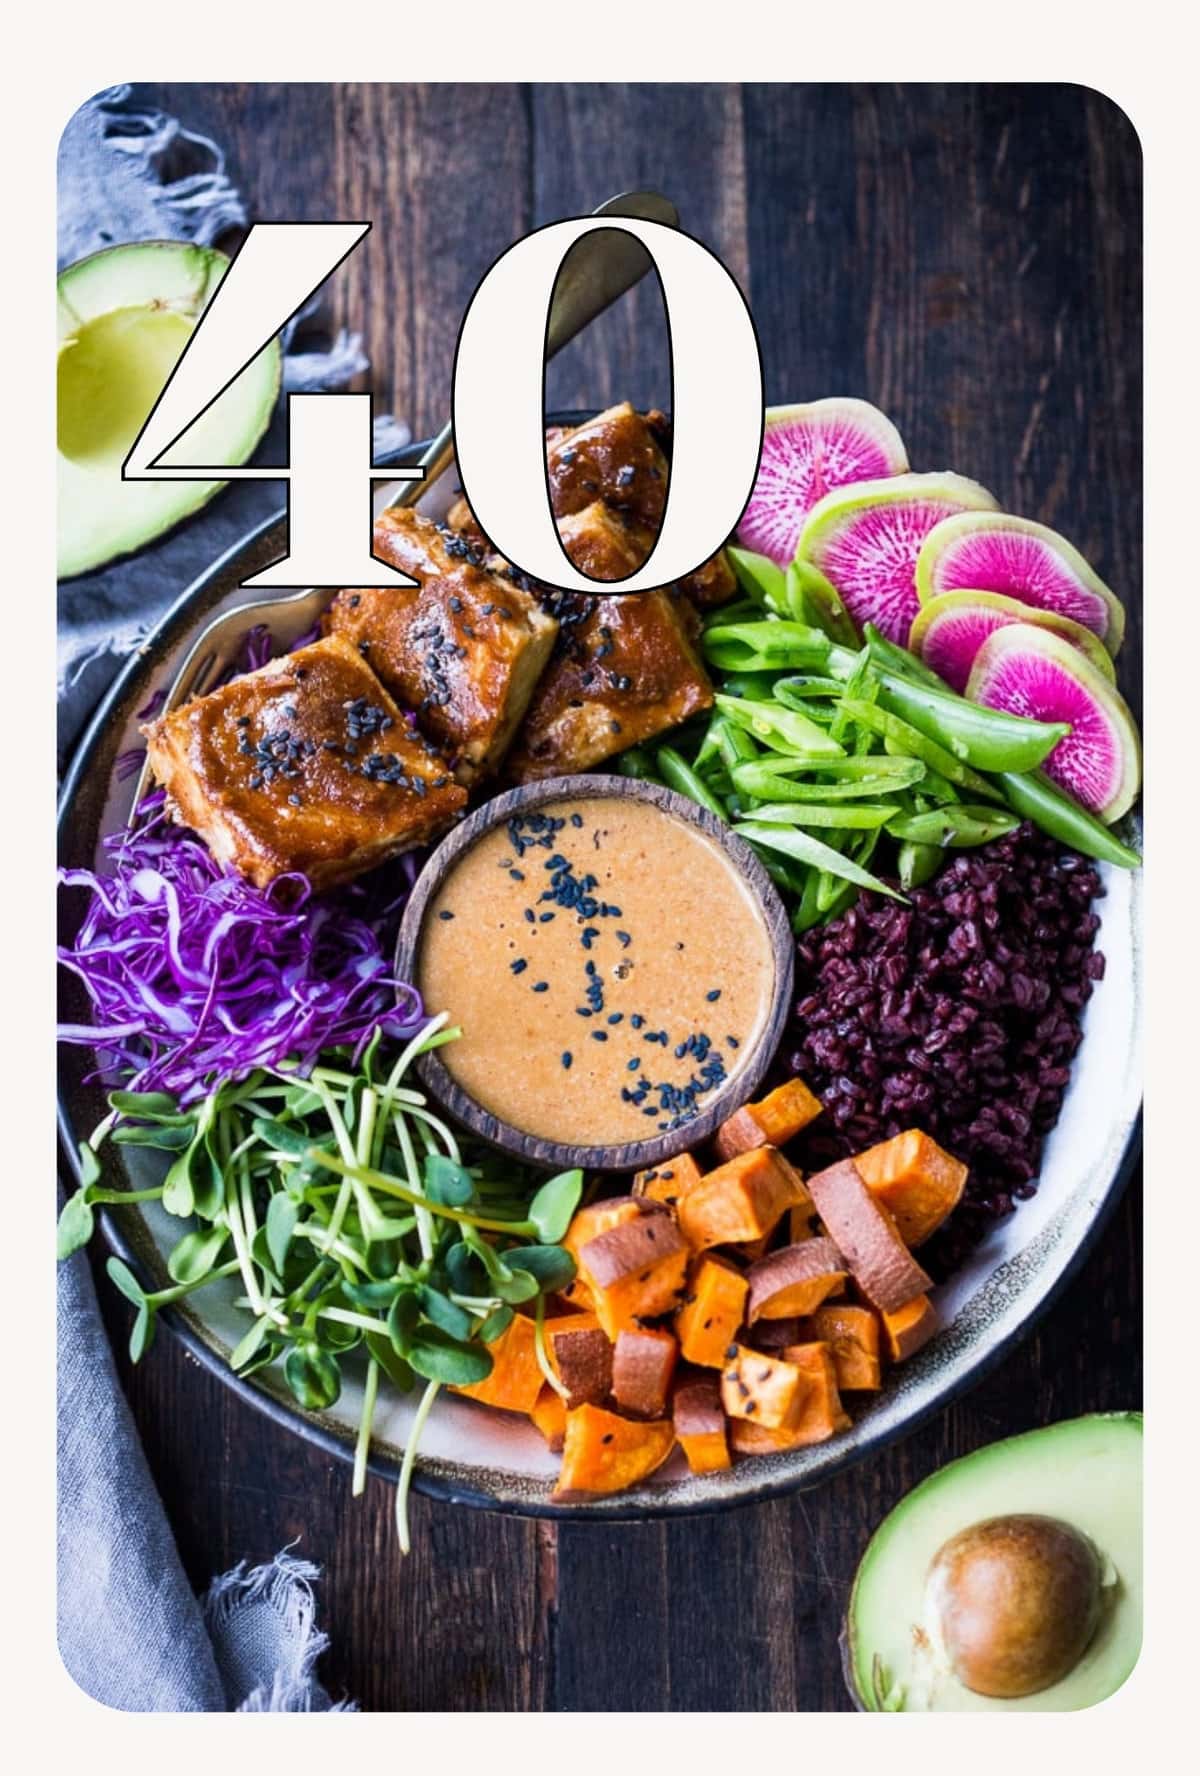 40 BEST Vegan Recipes- these mouthwatering plant-based meals will get you excited about cooking again. #veganrecipes #vegandinnerrecipes #plantbased